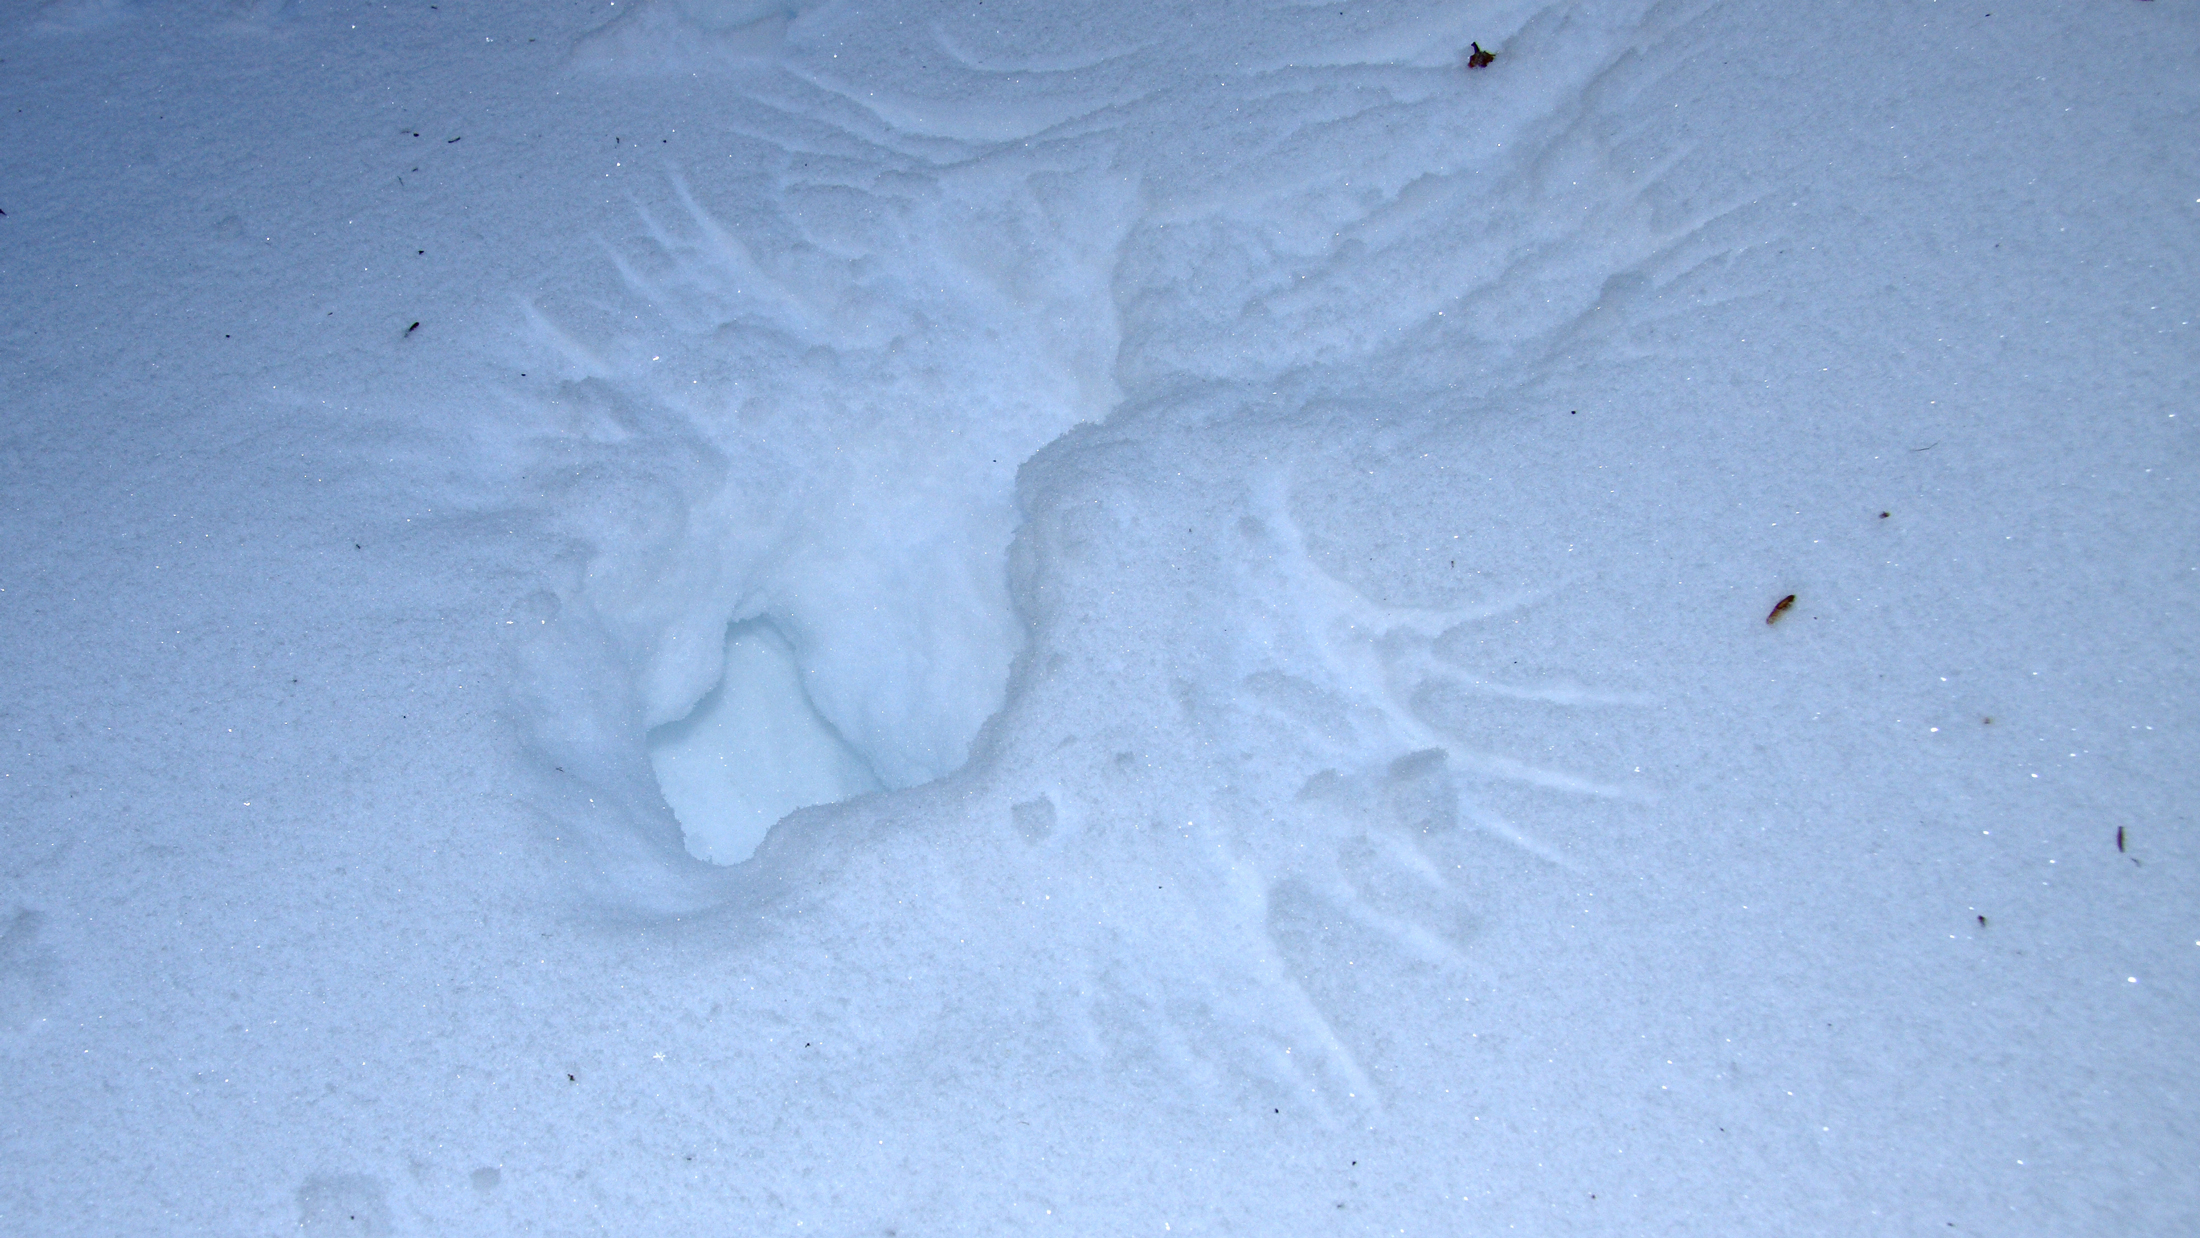 Snow hole and wing marks: signs of a ruffed grouse shelter. Photo © Cephas / Wikimedia through a Creative Commons license.